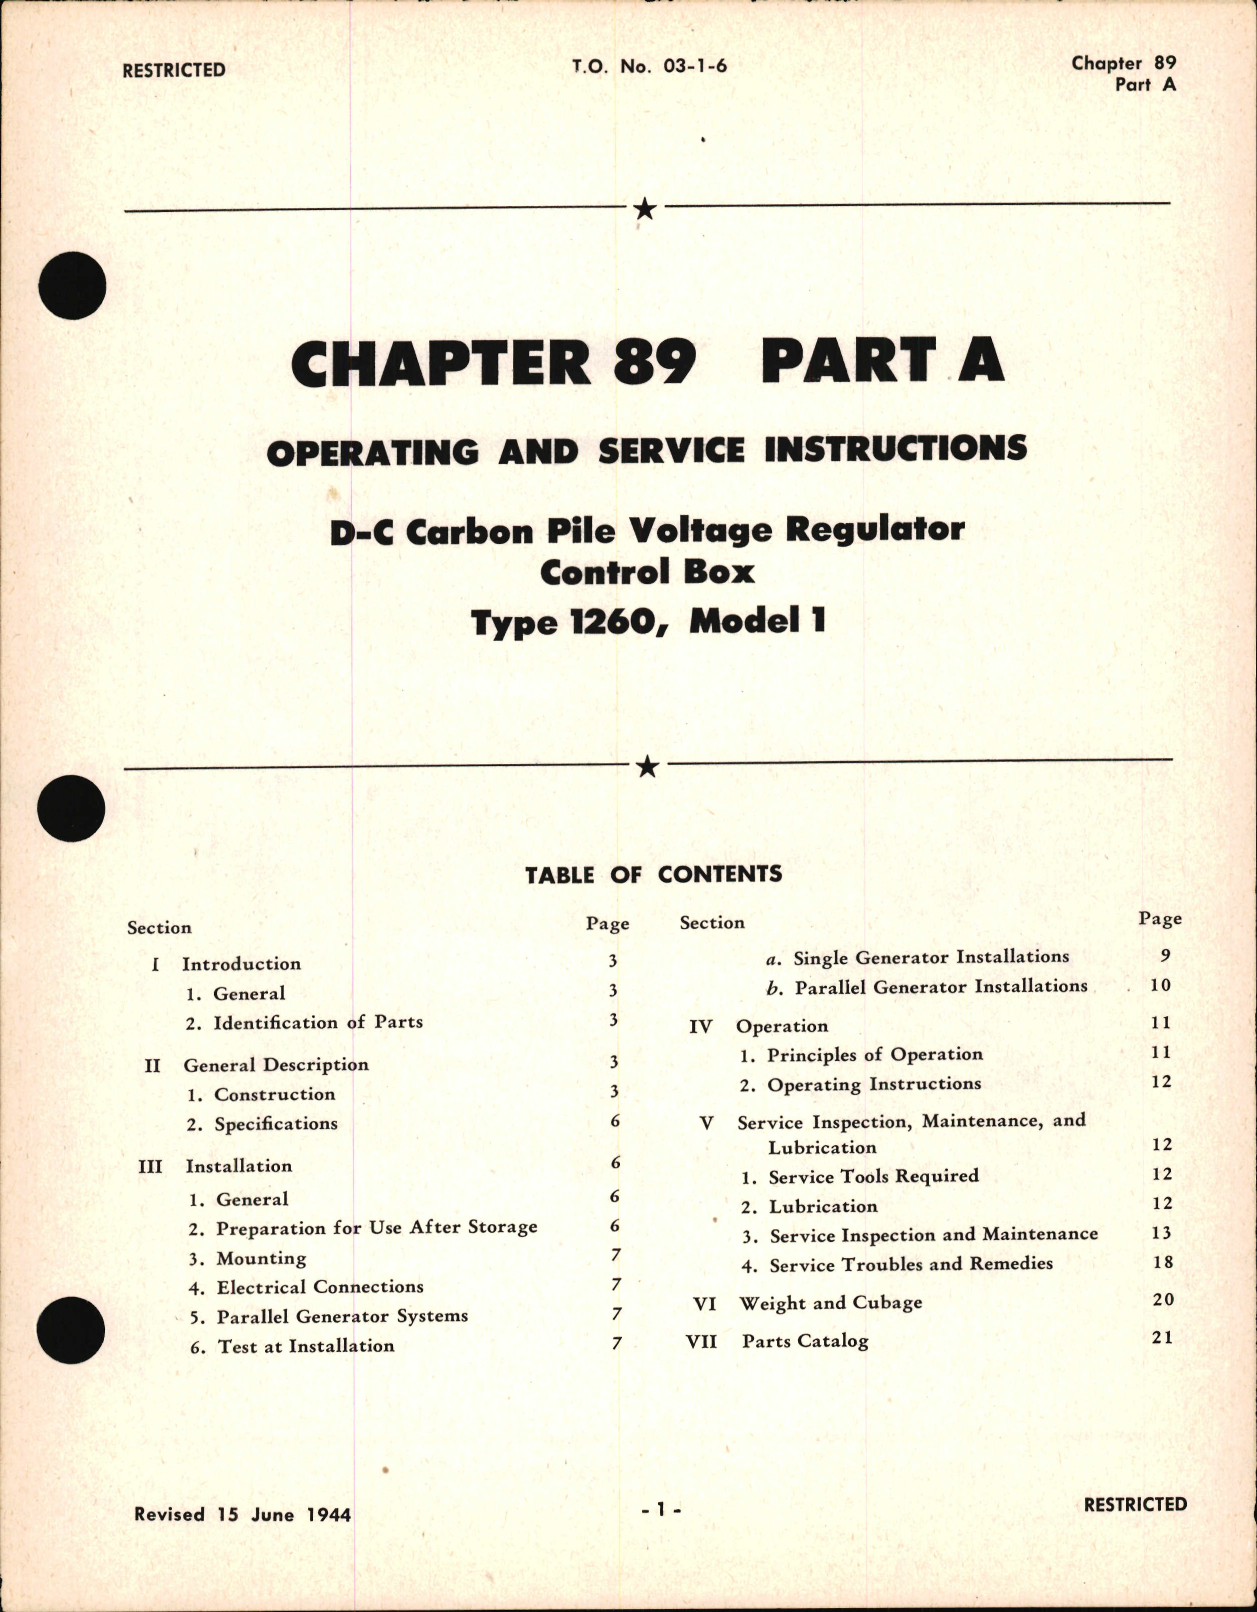 Sample page 1 from AirCorps Library document: Operating and Service Instructions for D-C Pile Voltage Regulator Control Box, Type 1260 Model 1, Ch 89 Part A